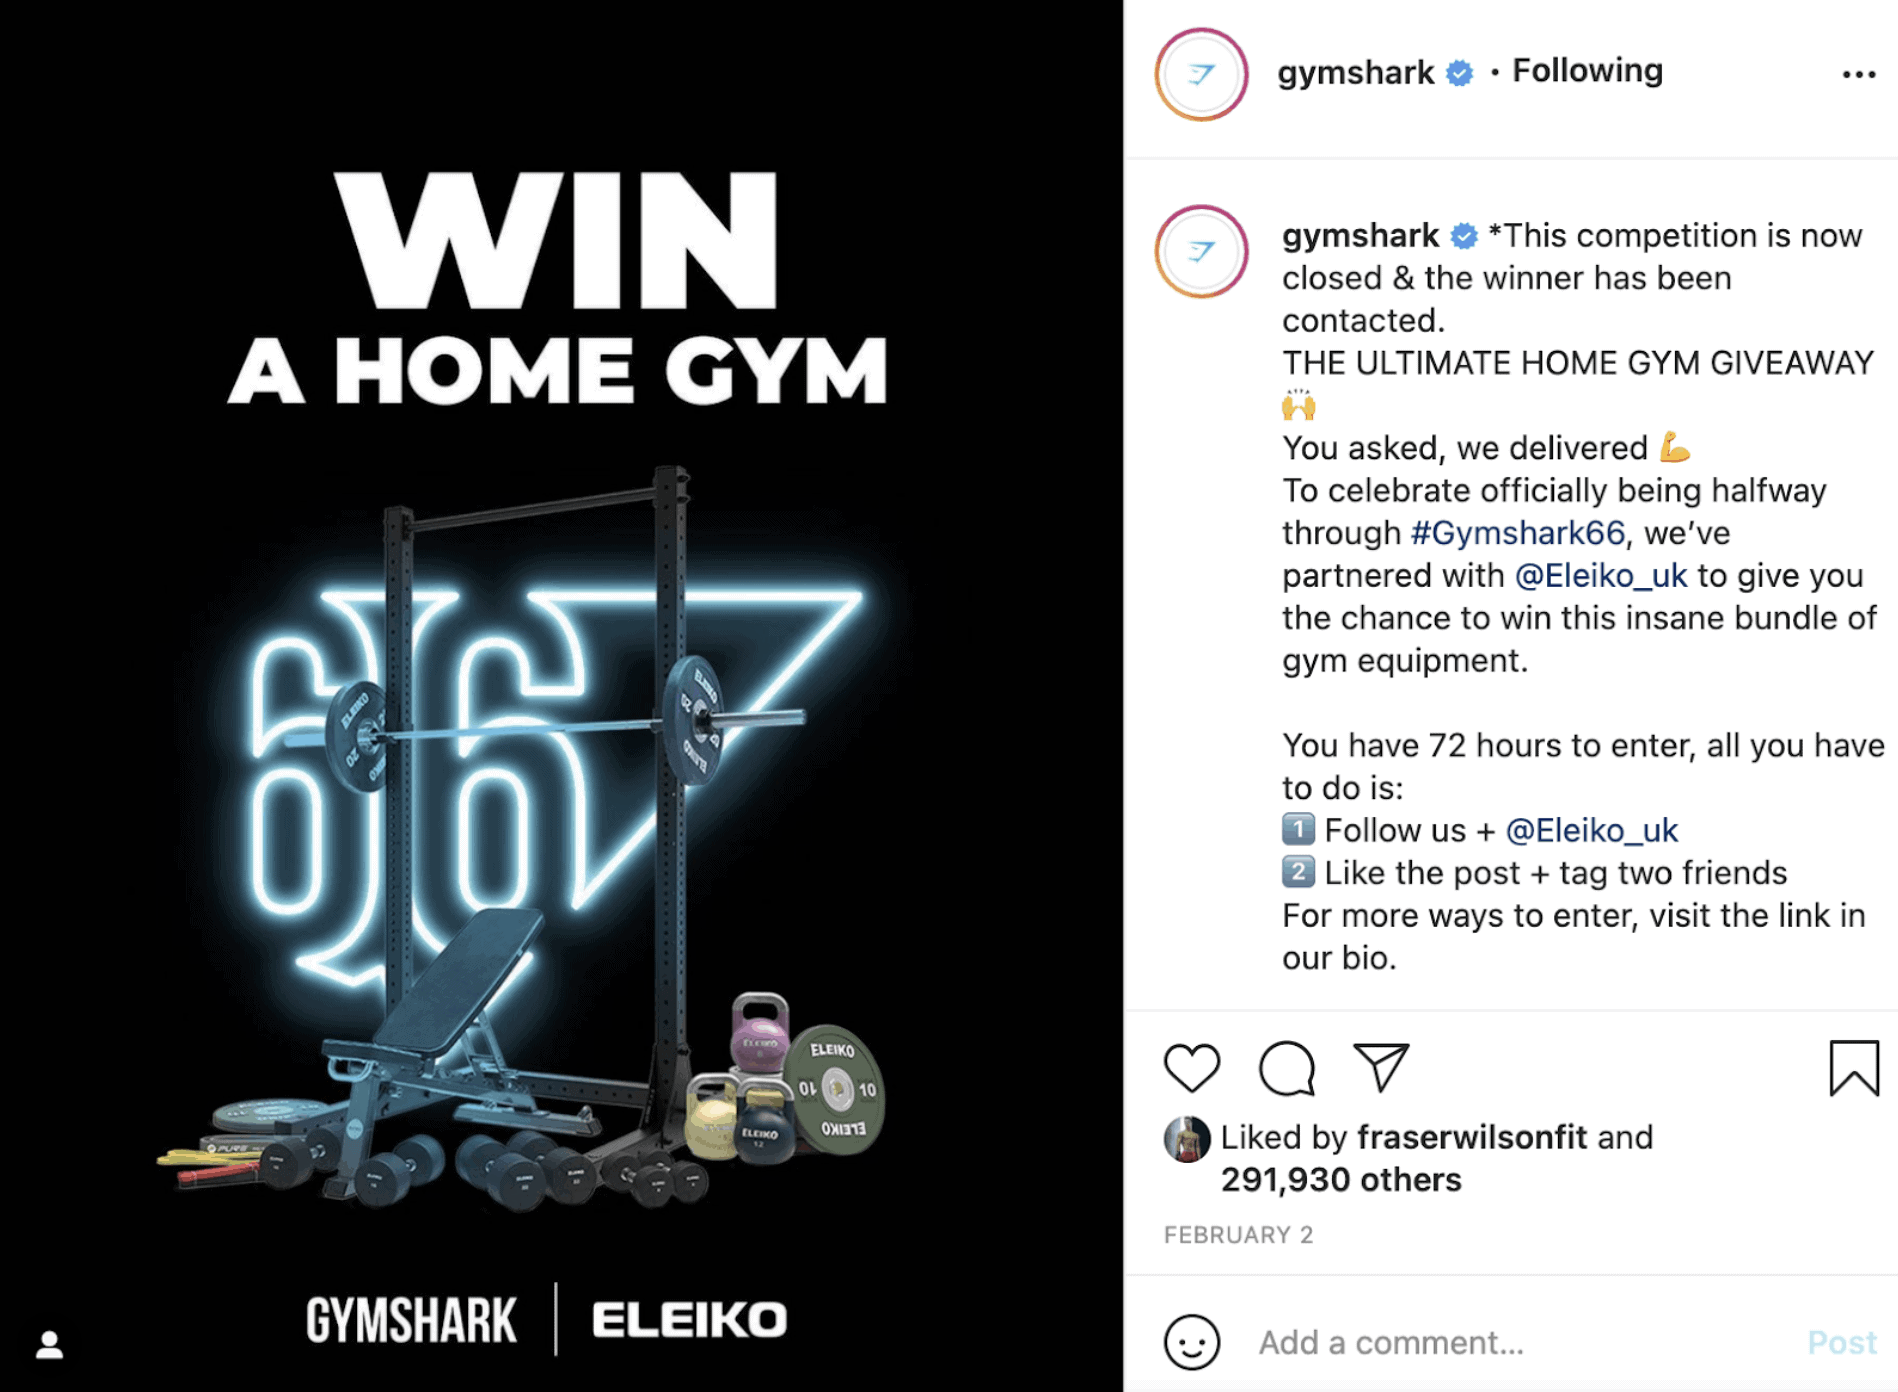 FOMO example of a UGC contest from Gymshark and Eleiko